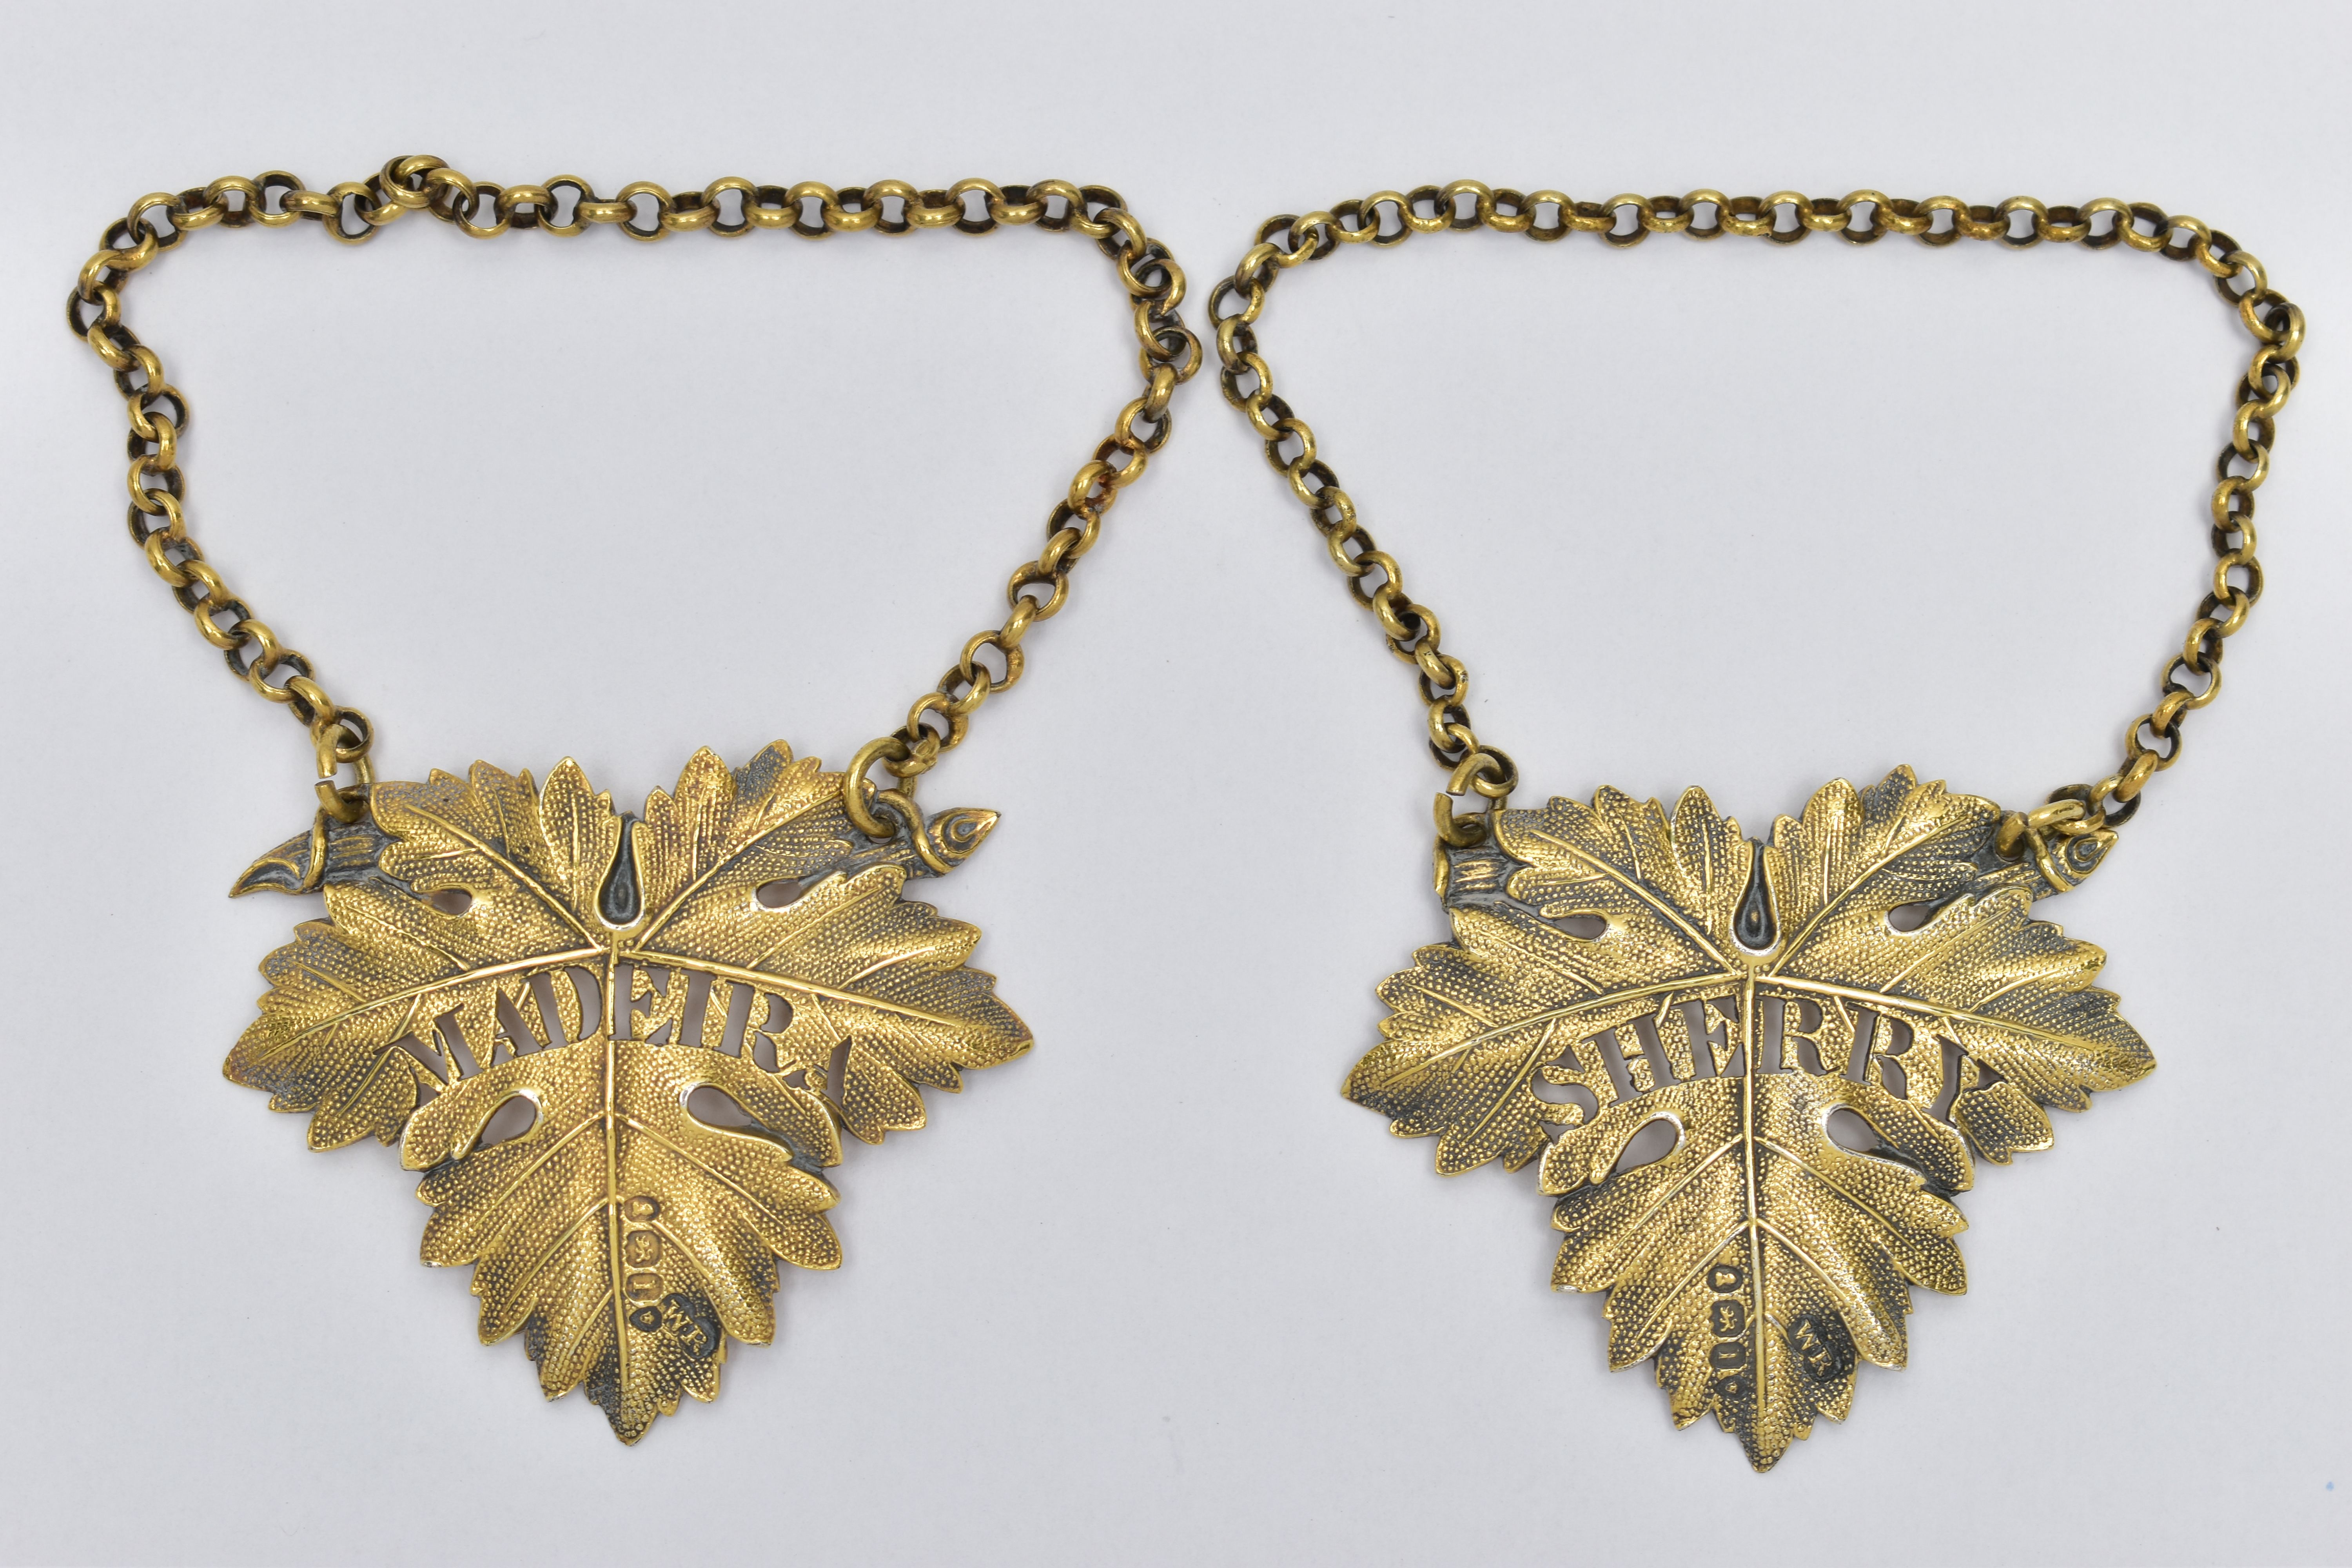 A PAIR OF GEORGE IV SILVER GILT DECANTER LABELS, cast as vine leaves, named for 'SHERRY' and '